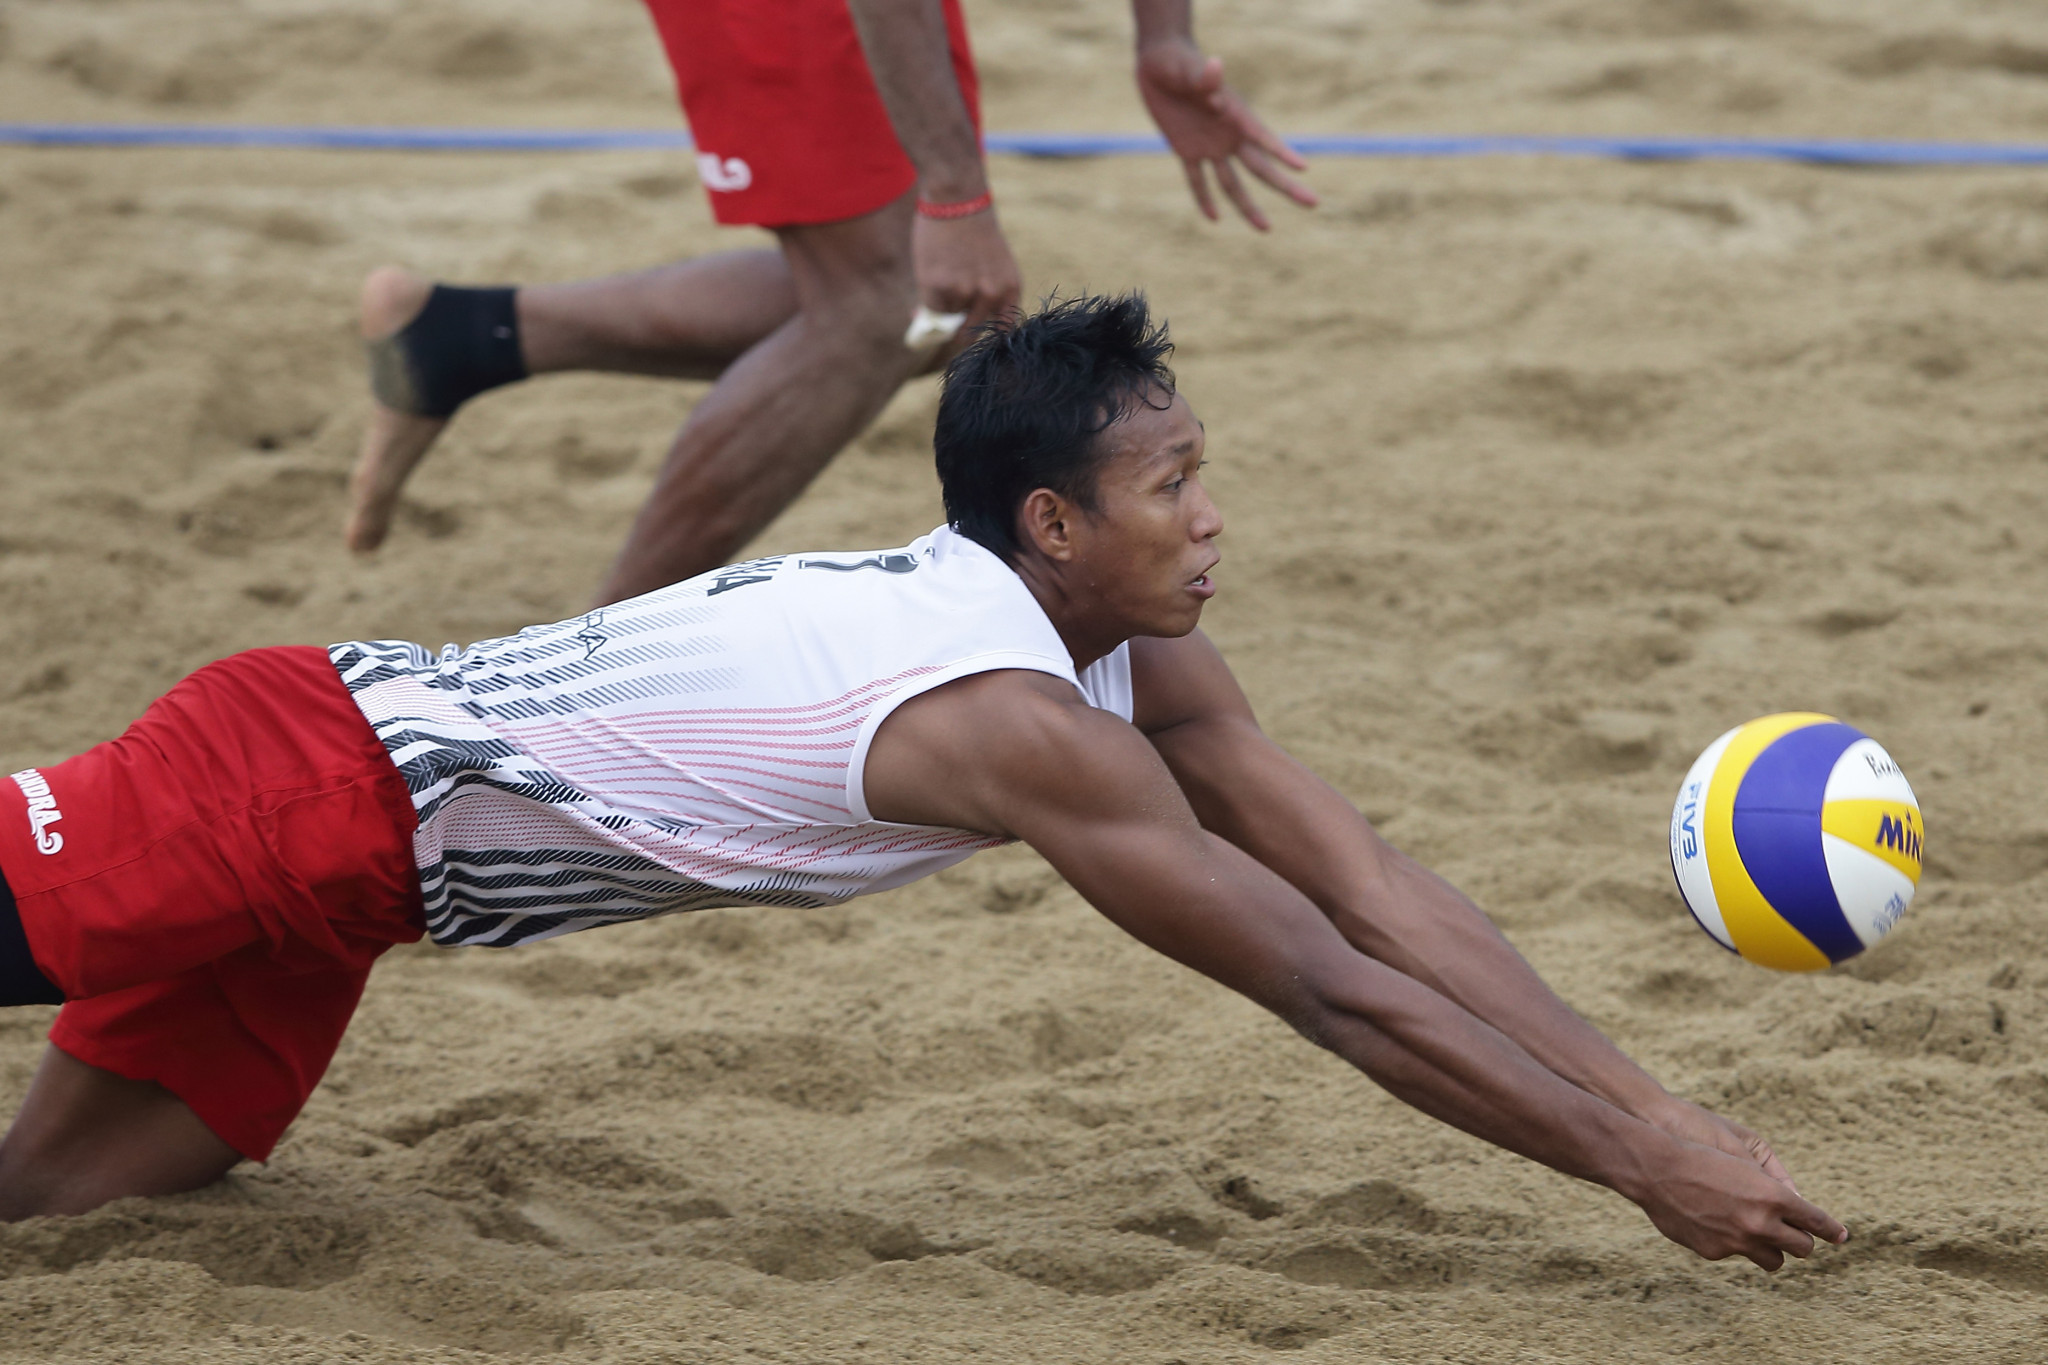 Palembang hosting beach volleyball test event as preparations continue for 2018 Asian Games